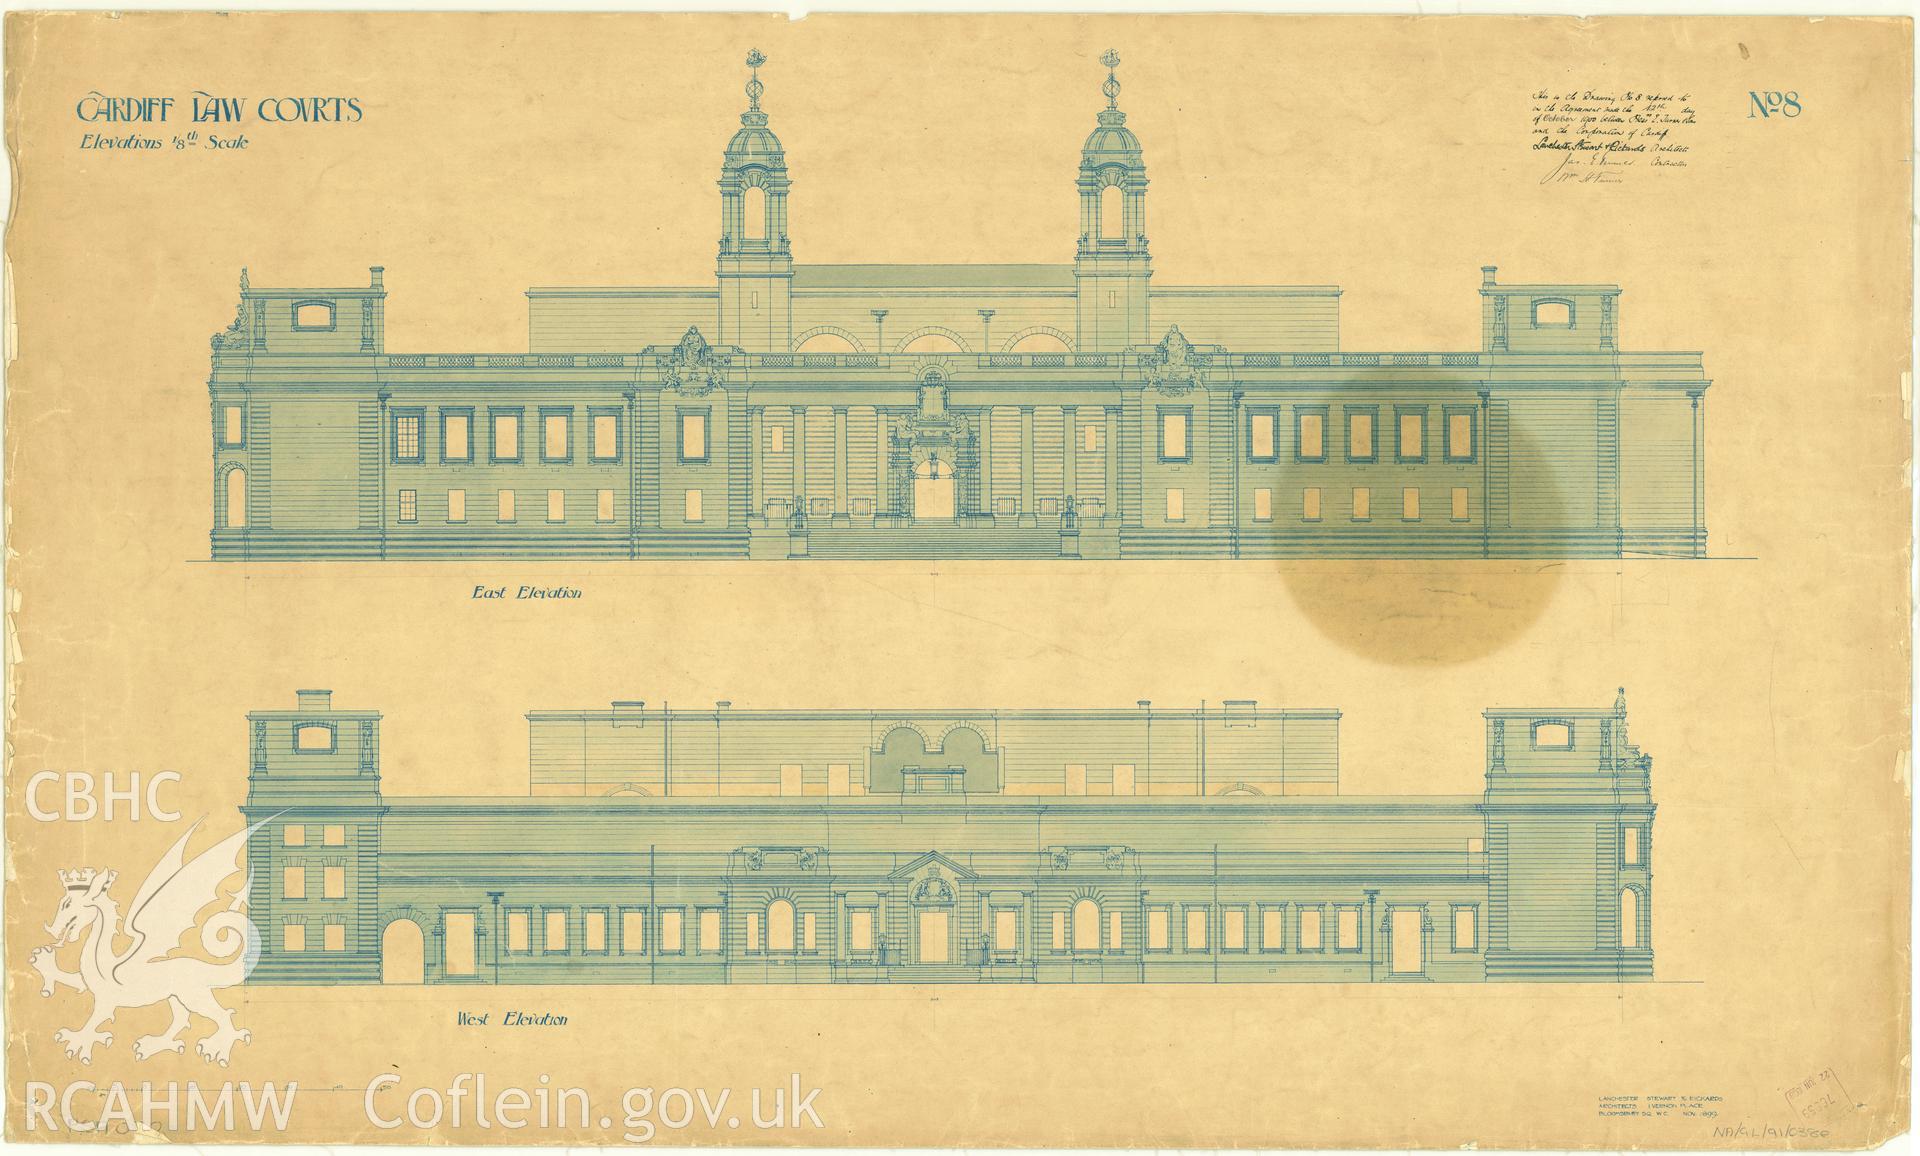 Law Court, Cathays Park, Cardiff; measured drawing showing east and west elevation views, produced by Lanchester Stewart and Rickards, 1899.